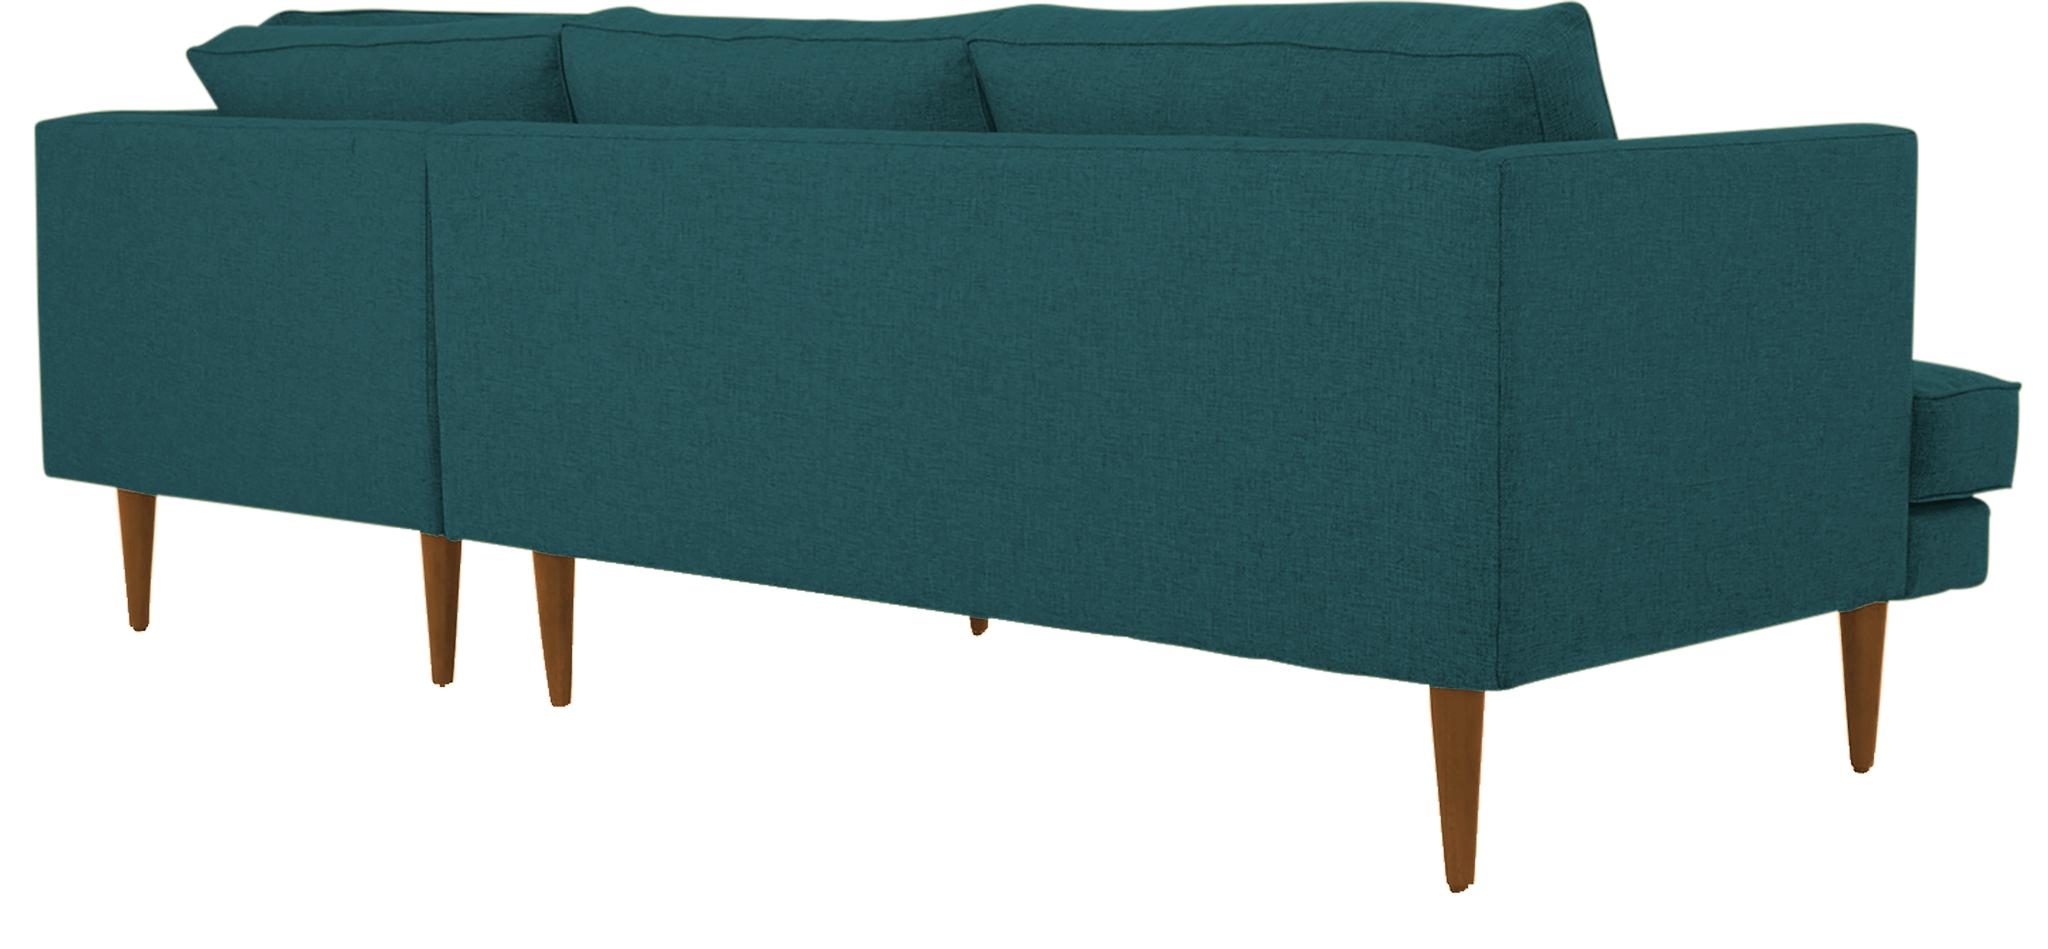 Blue Preston Mid Century Modern Sectional with Bumper (2 piece) - Royale Peacock - Mocha - Left - Image 3